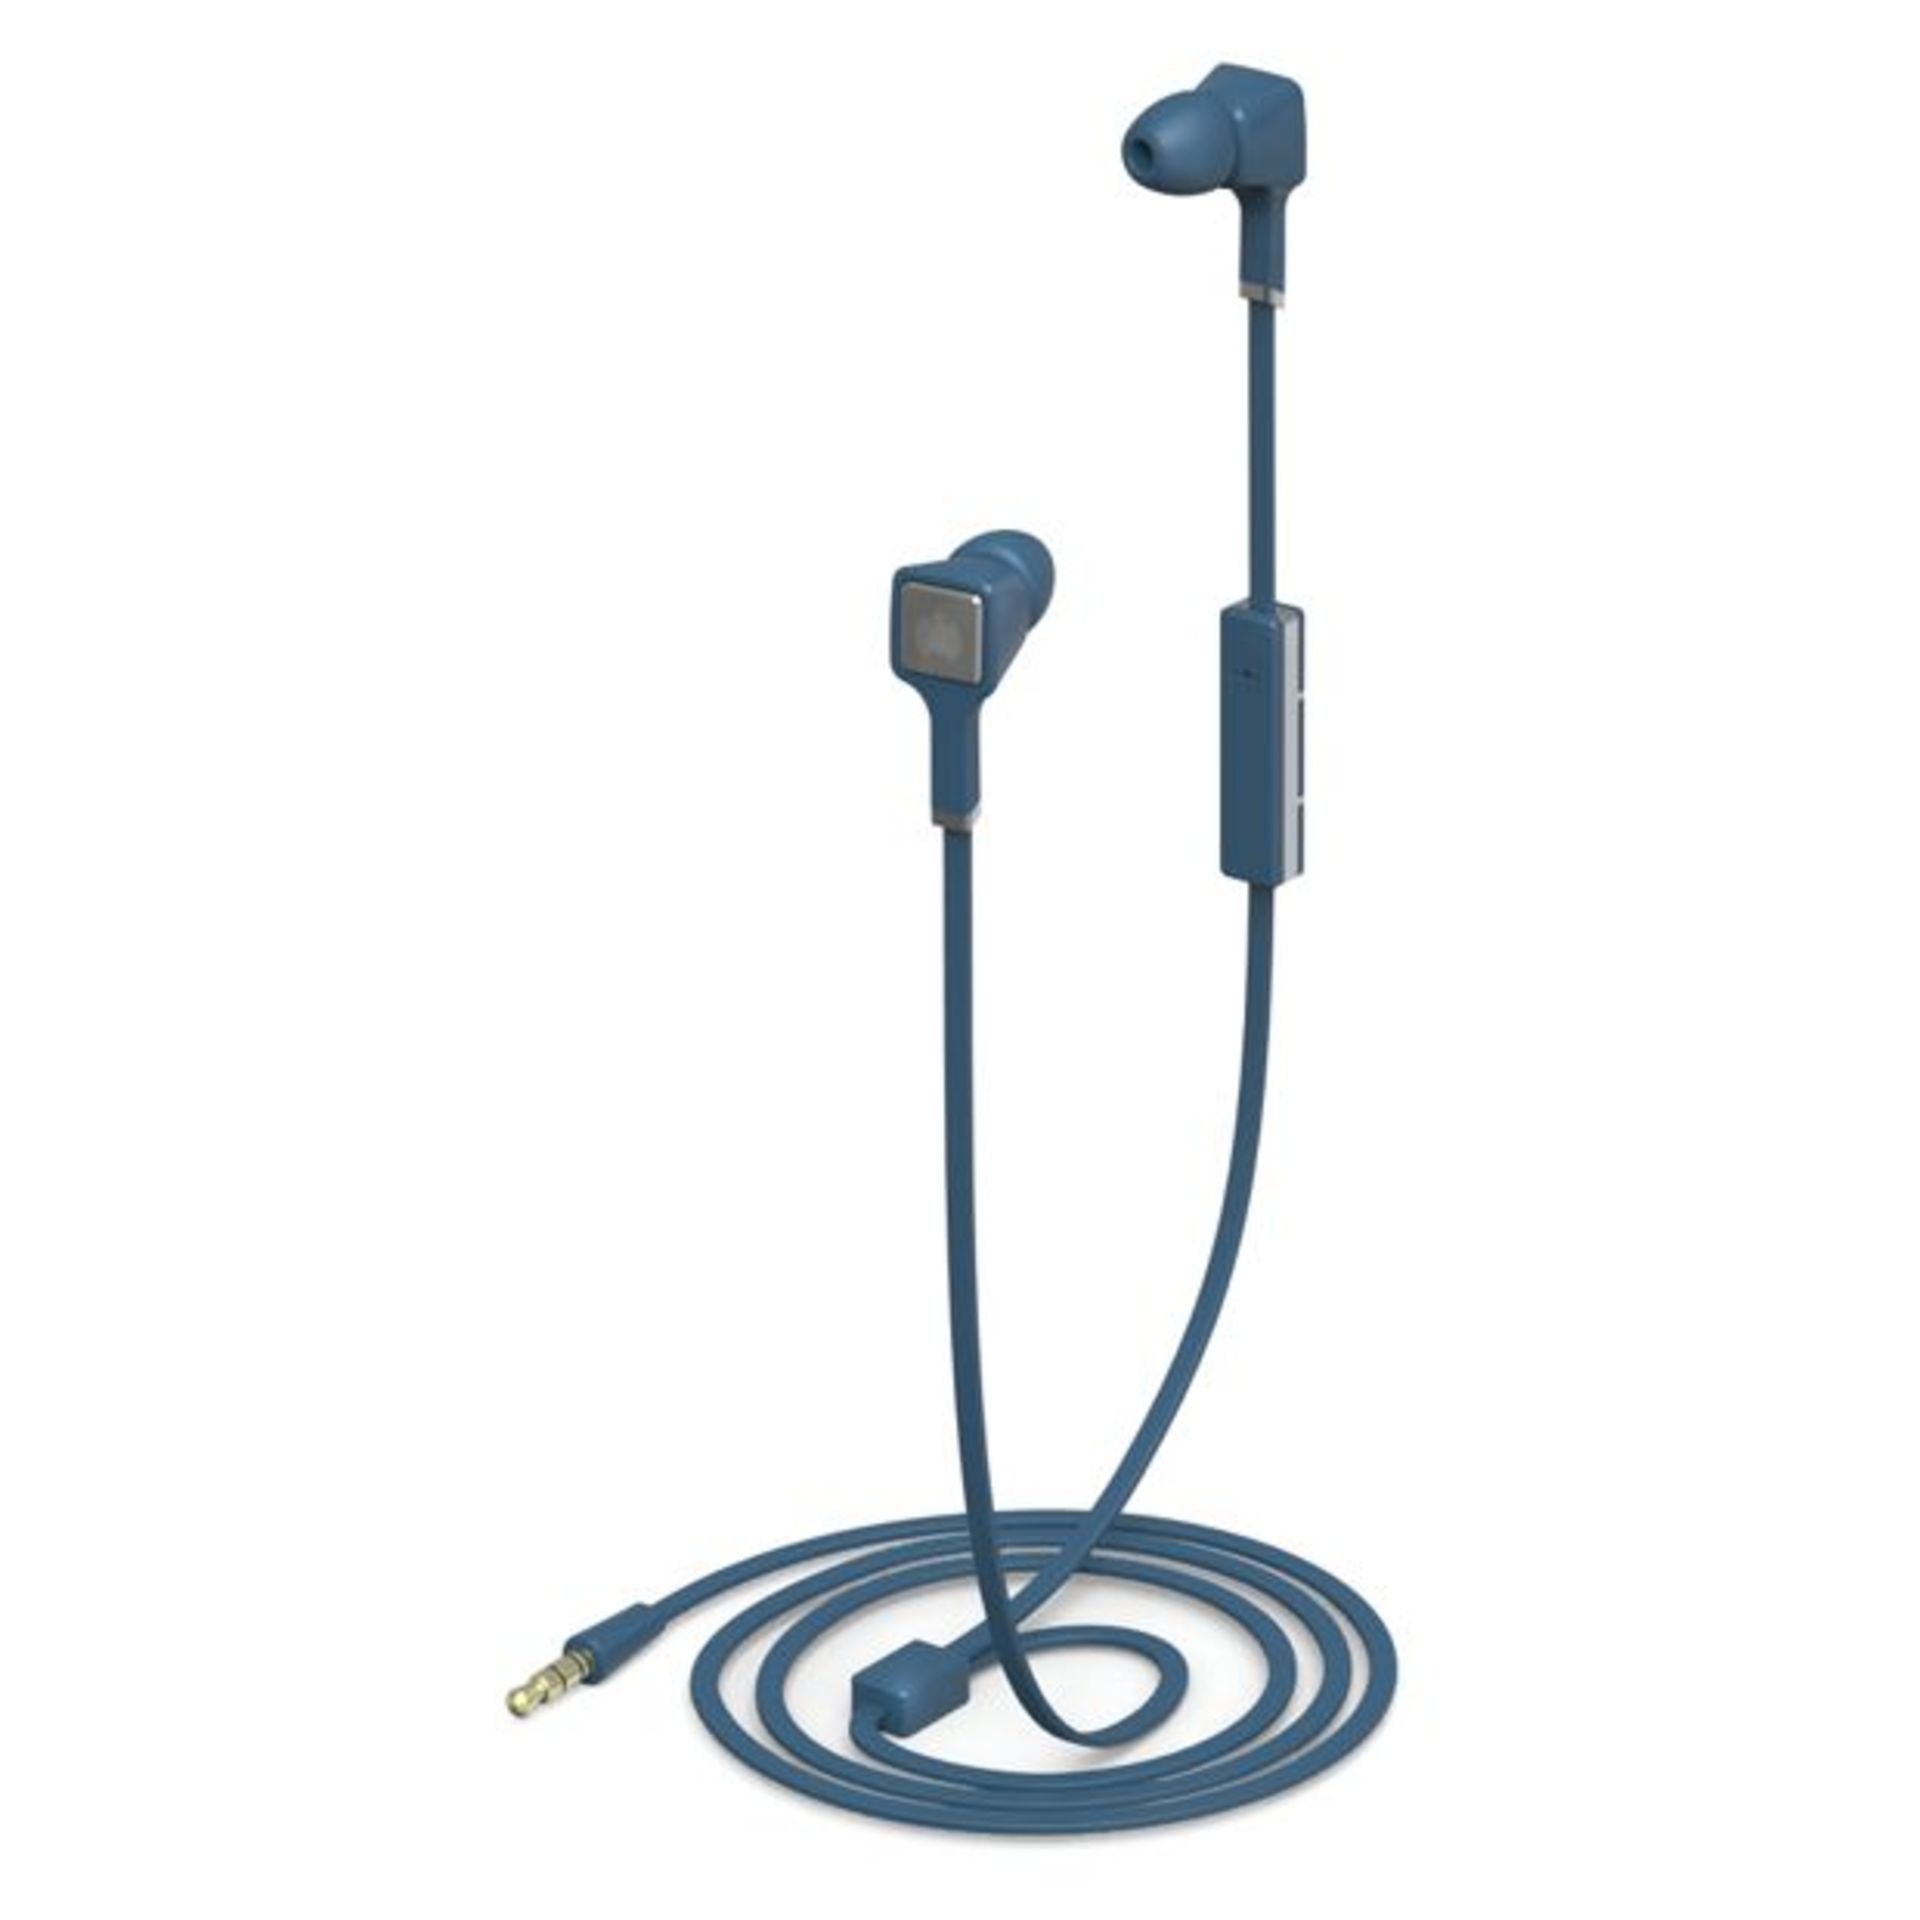 V *TRADE QTY* Brand New Ministry Of Sound Audio In - In Ear Headphones - Blue/Grey - RRP£39.99 X 5